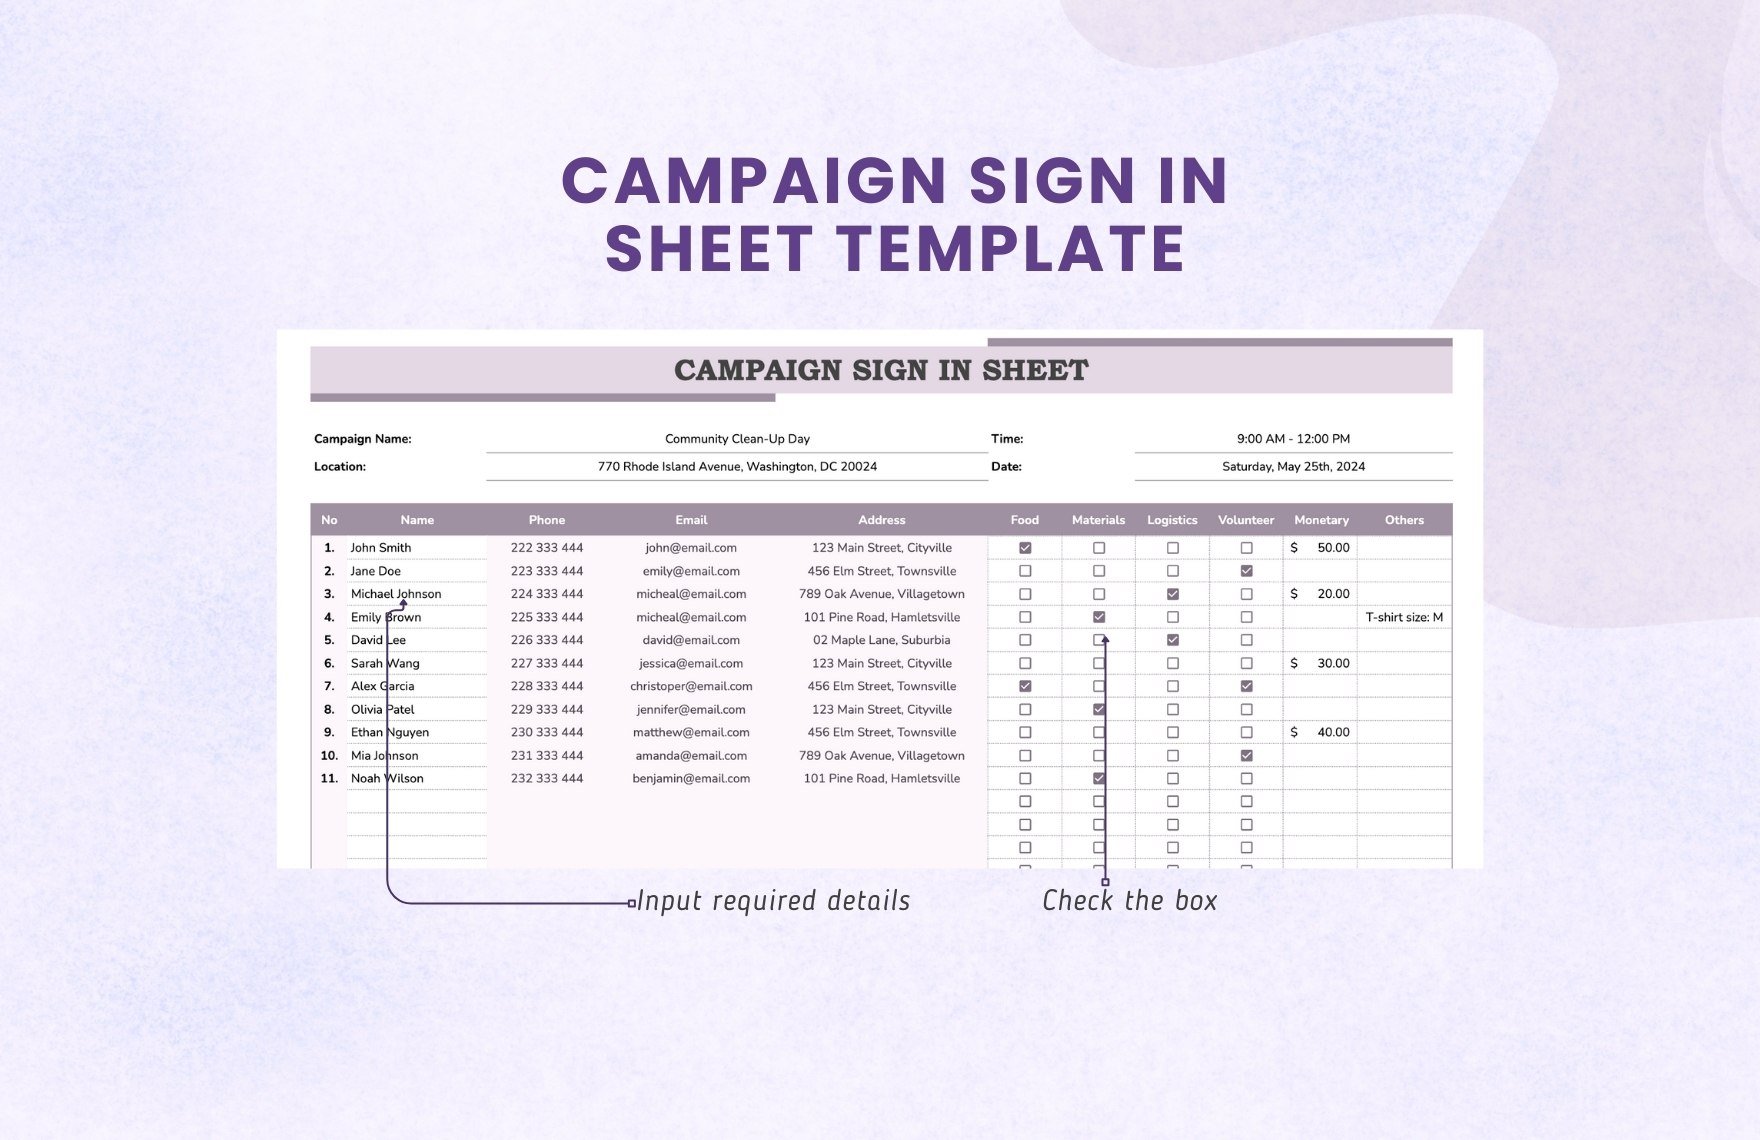 Campaign Sign in Sheet Template